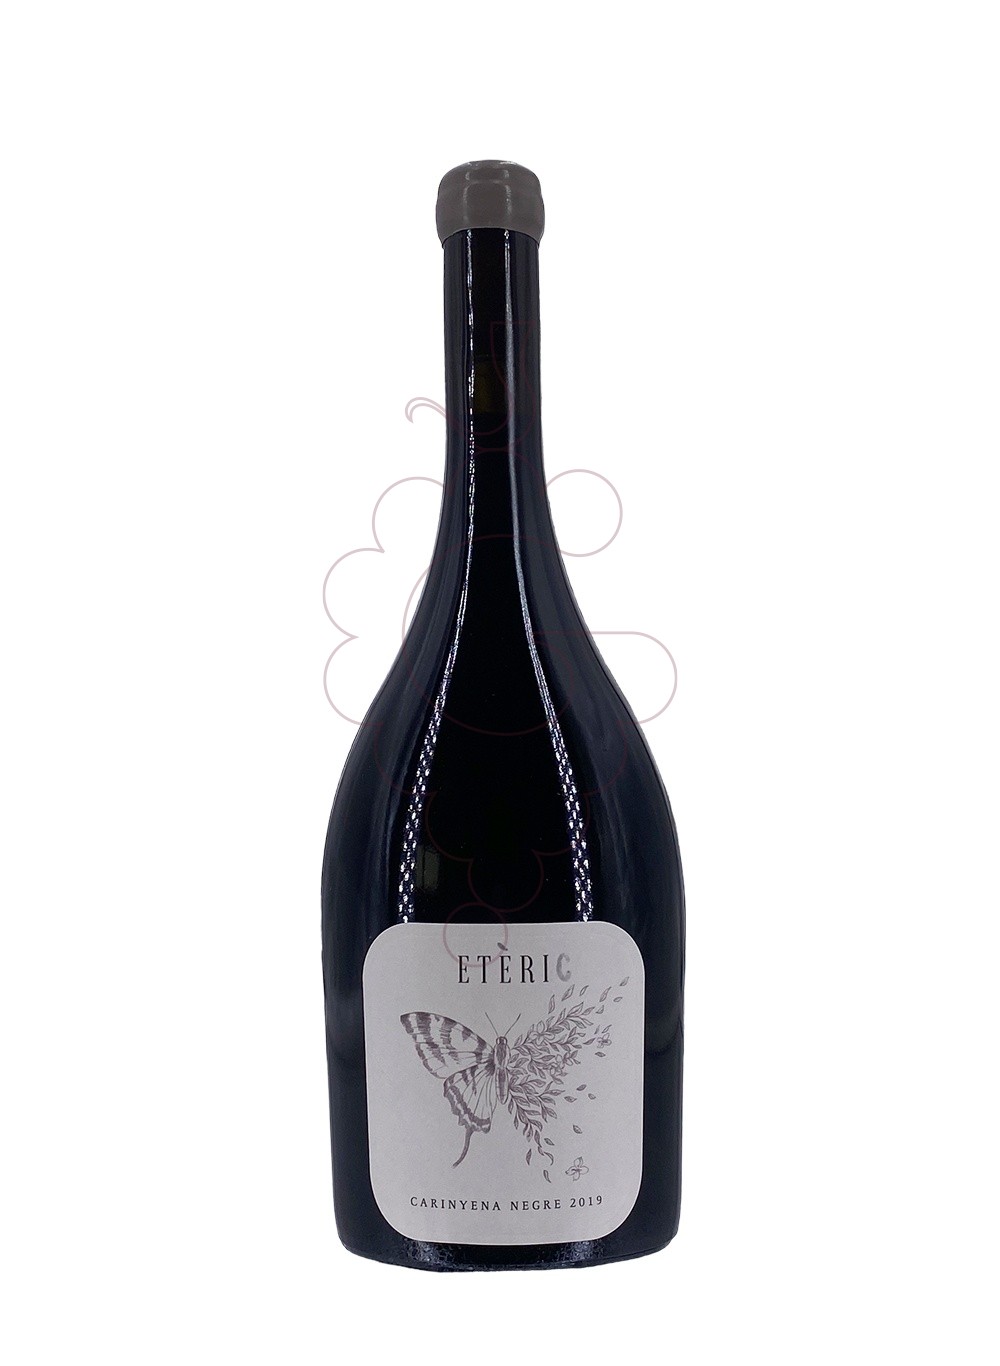 Photo Eteric negre 2019 75 cl red wine